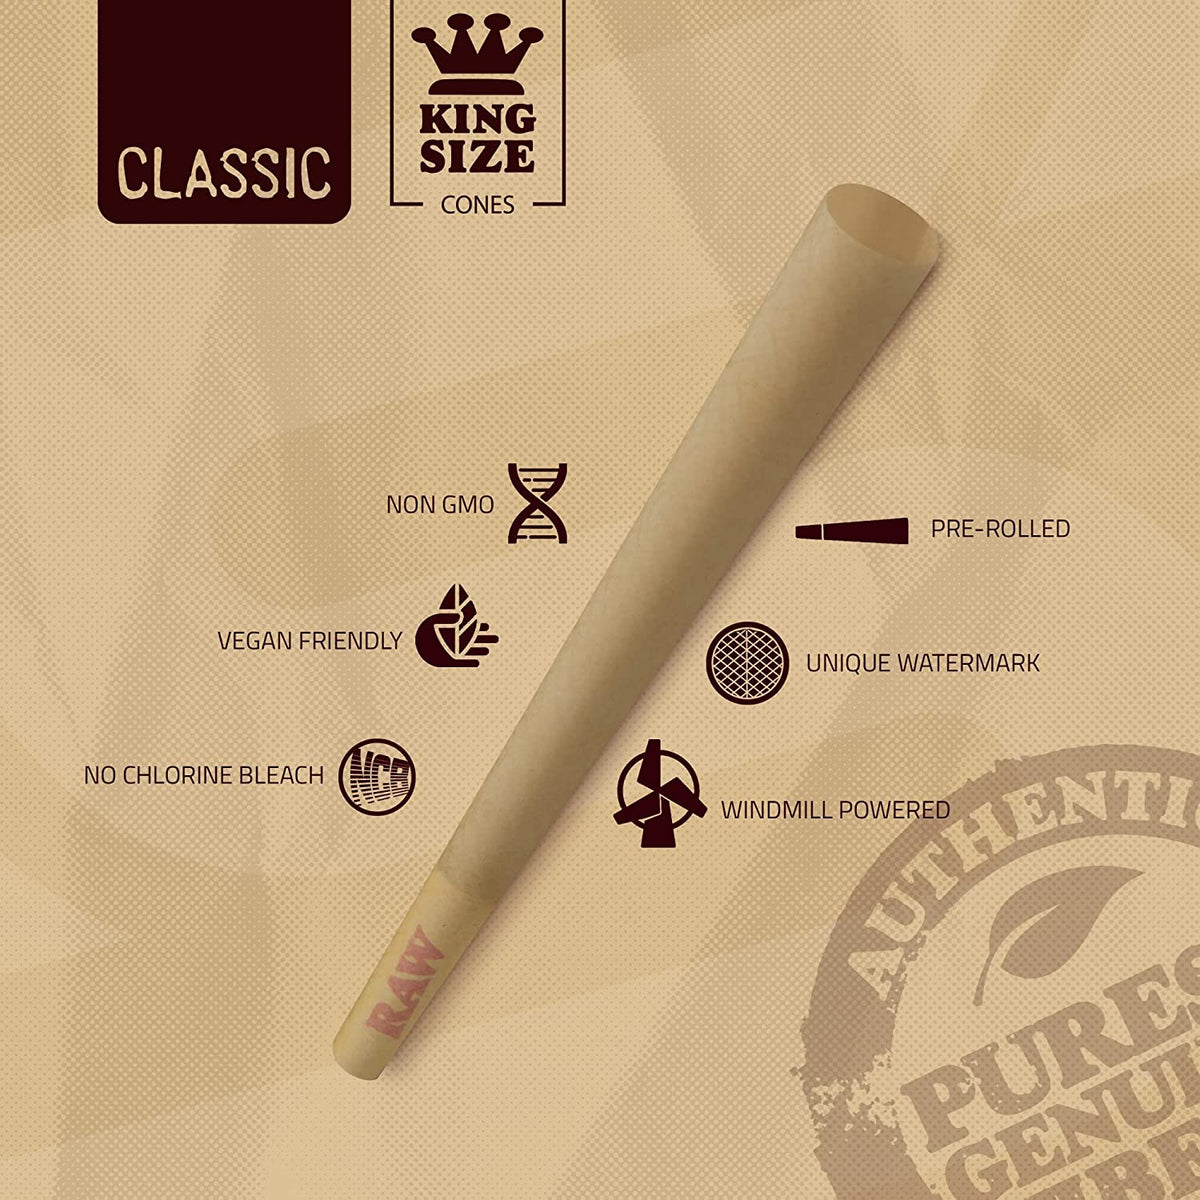 RAW King Size Cone Loader Bundle with 50 Classic King Size Cones Bundles RAWK-CNCL-KS03 esd-official